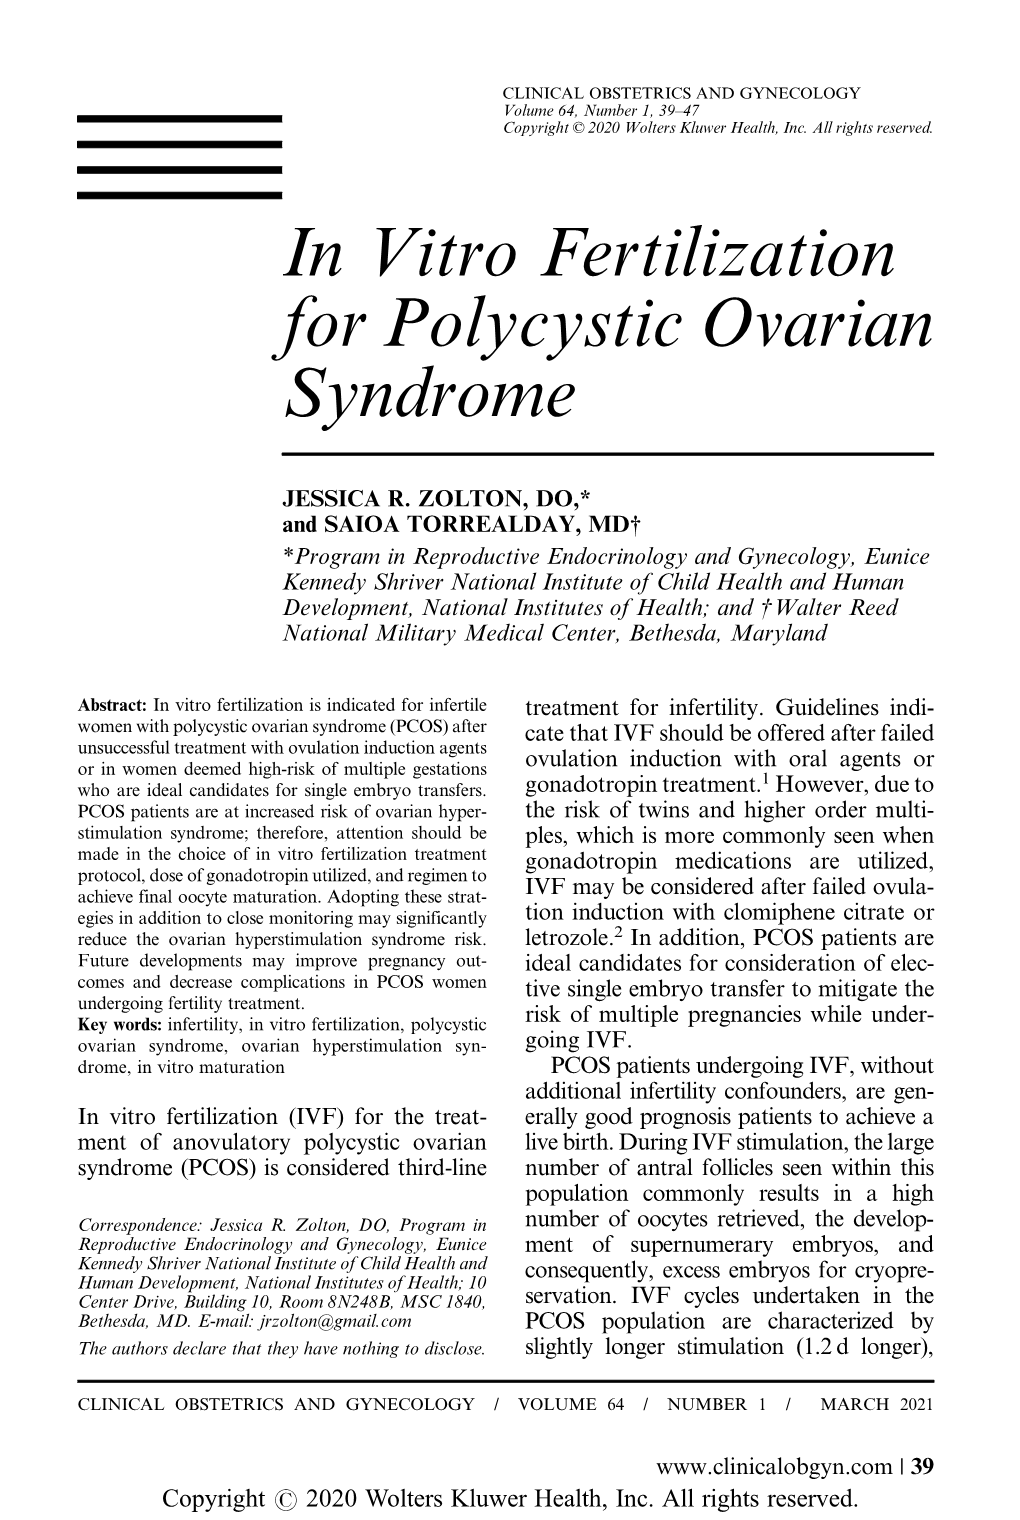 In Vitro Fertilization for Polycystic Ovarian Syndrome